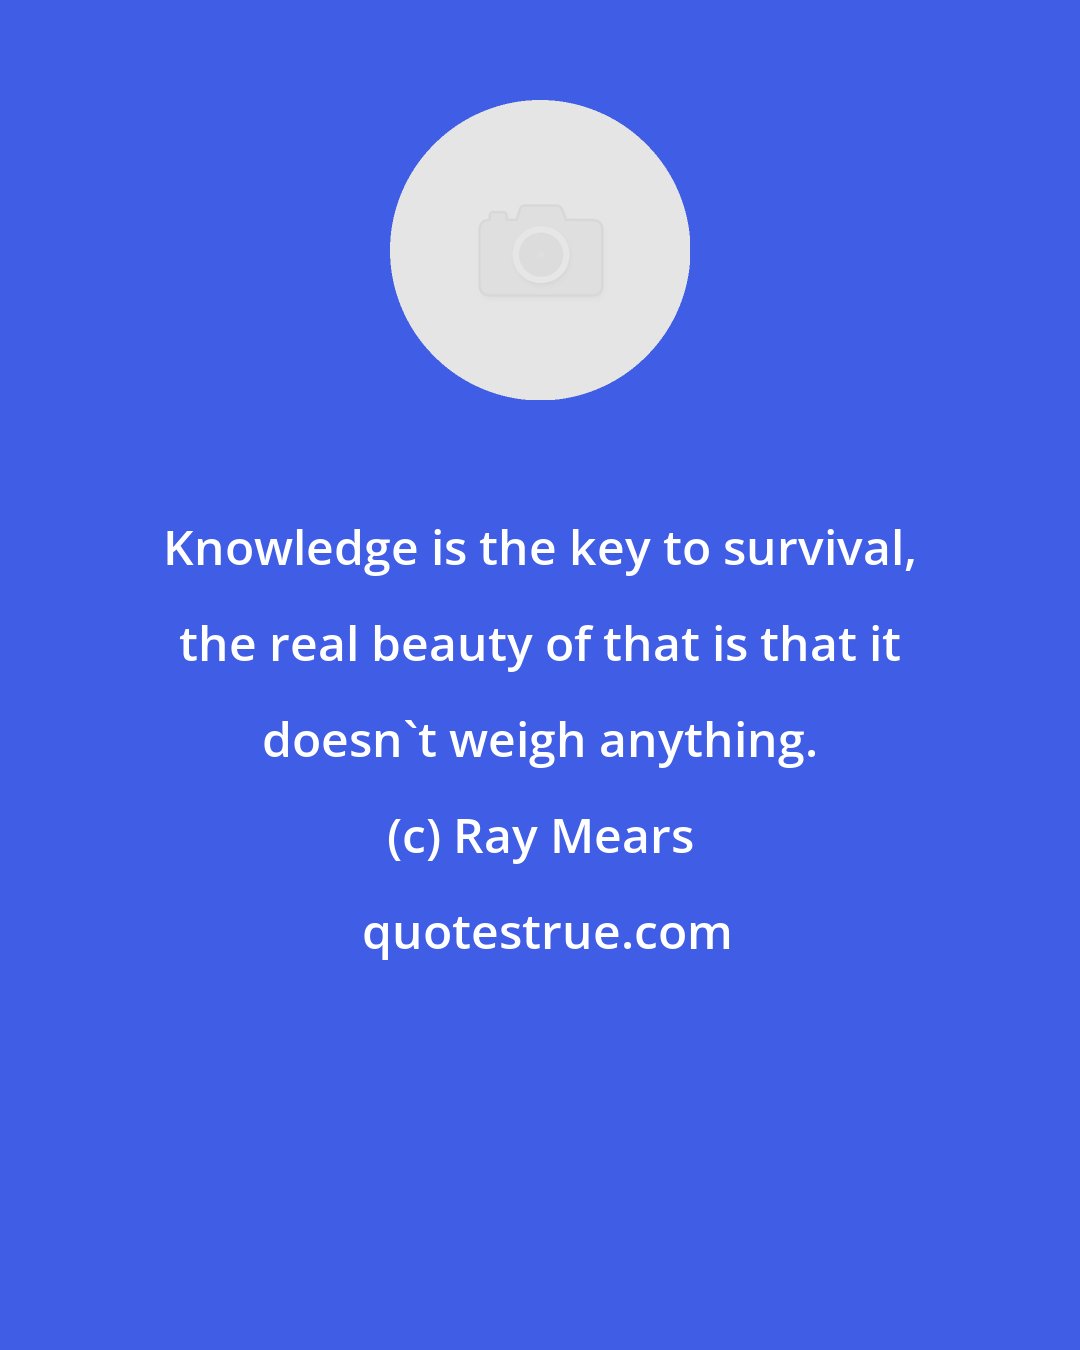 Ray Mears: Knowledge is the key to survival, the real beauty of that is that it doesn't weigh anything.